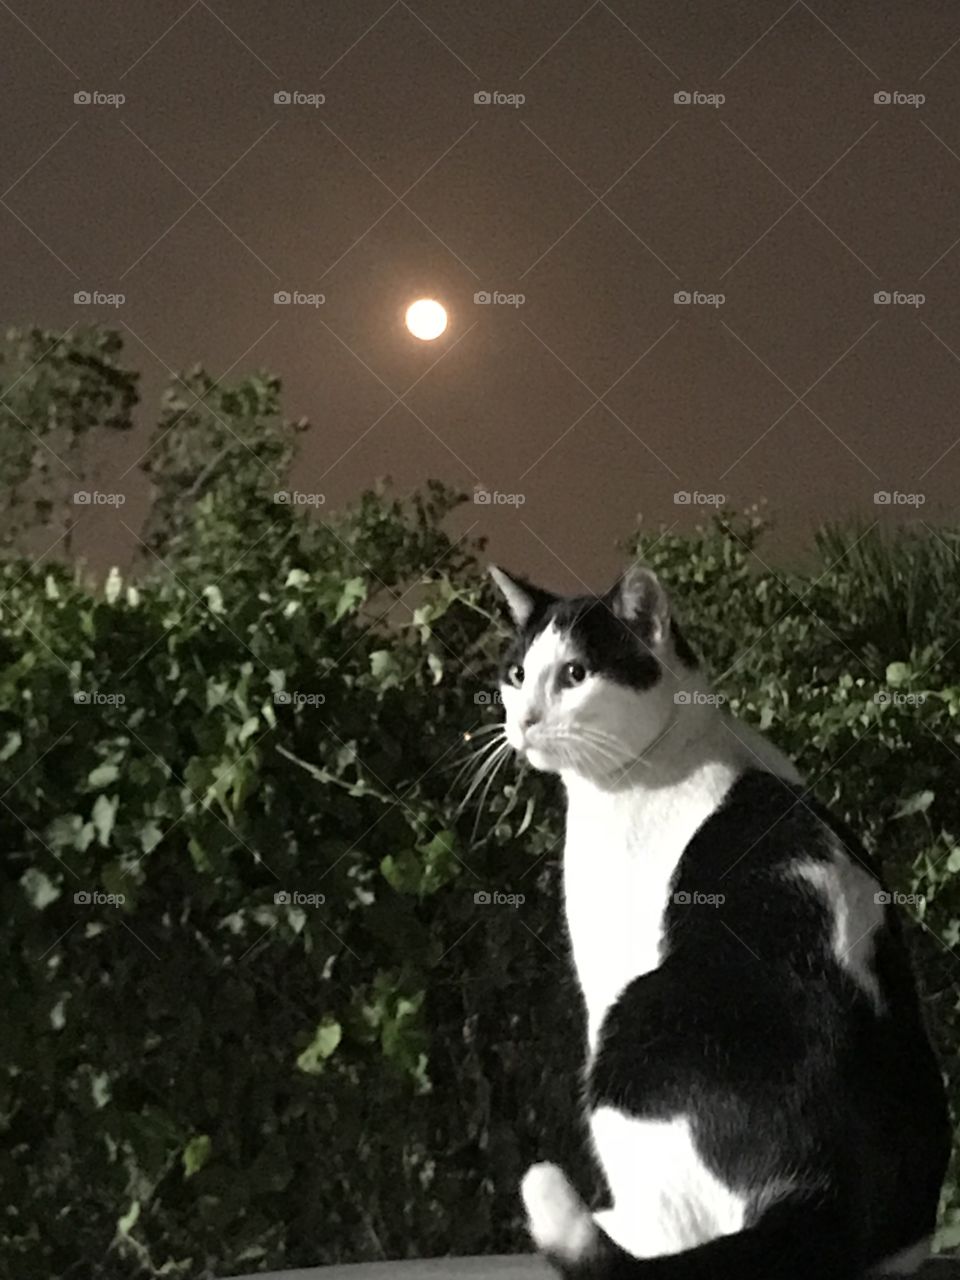 Moon and cat 